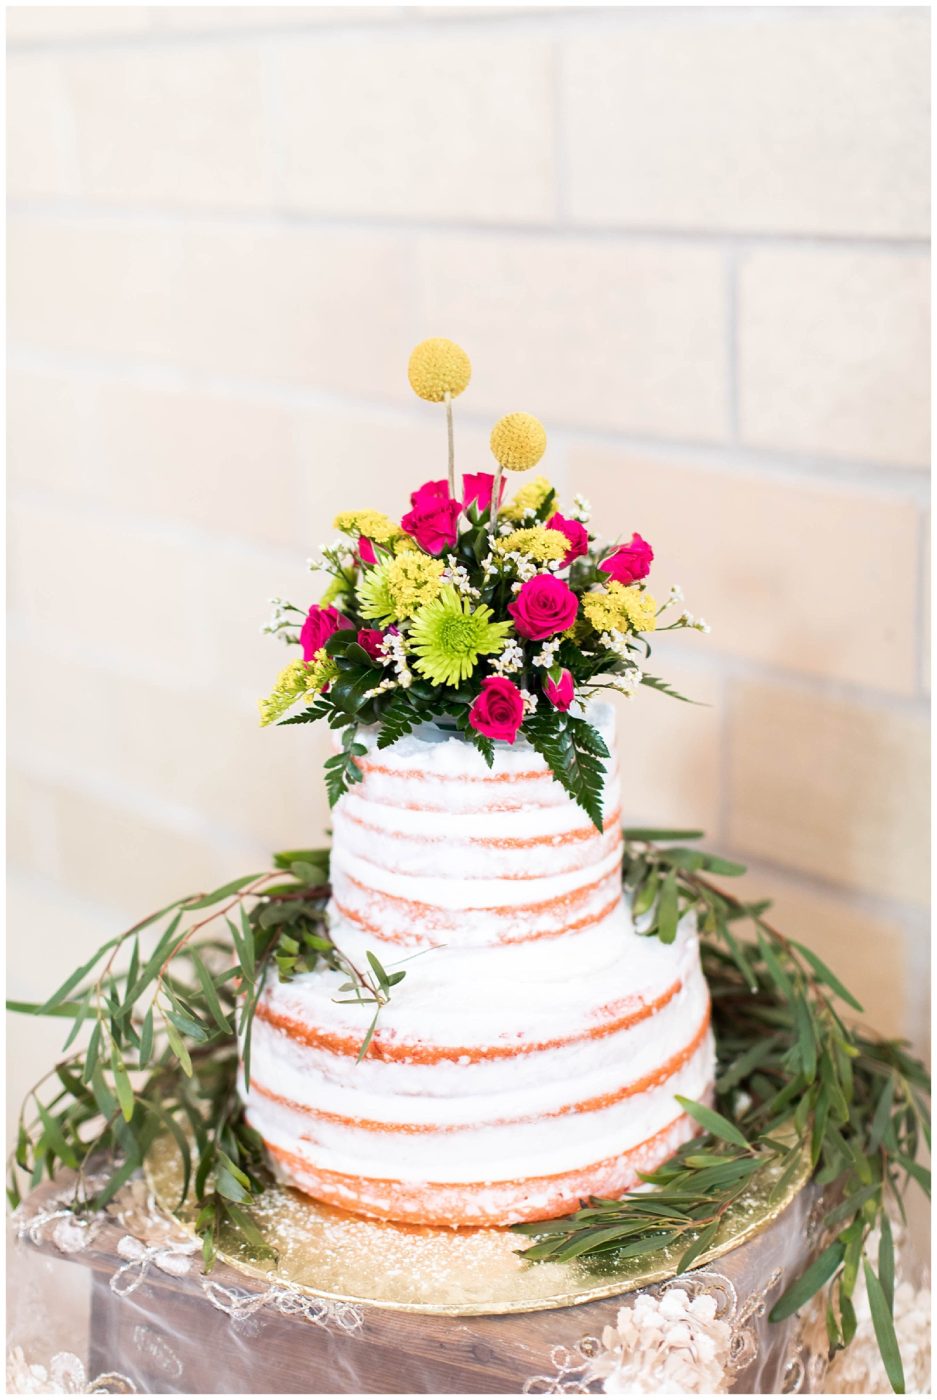 Naked 3-tier wedding cake topped with tons of wildflowers and surrounded by gorgeous greenery